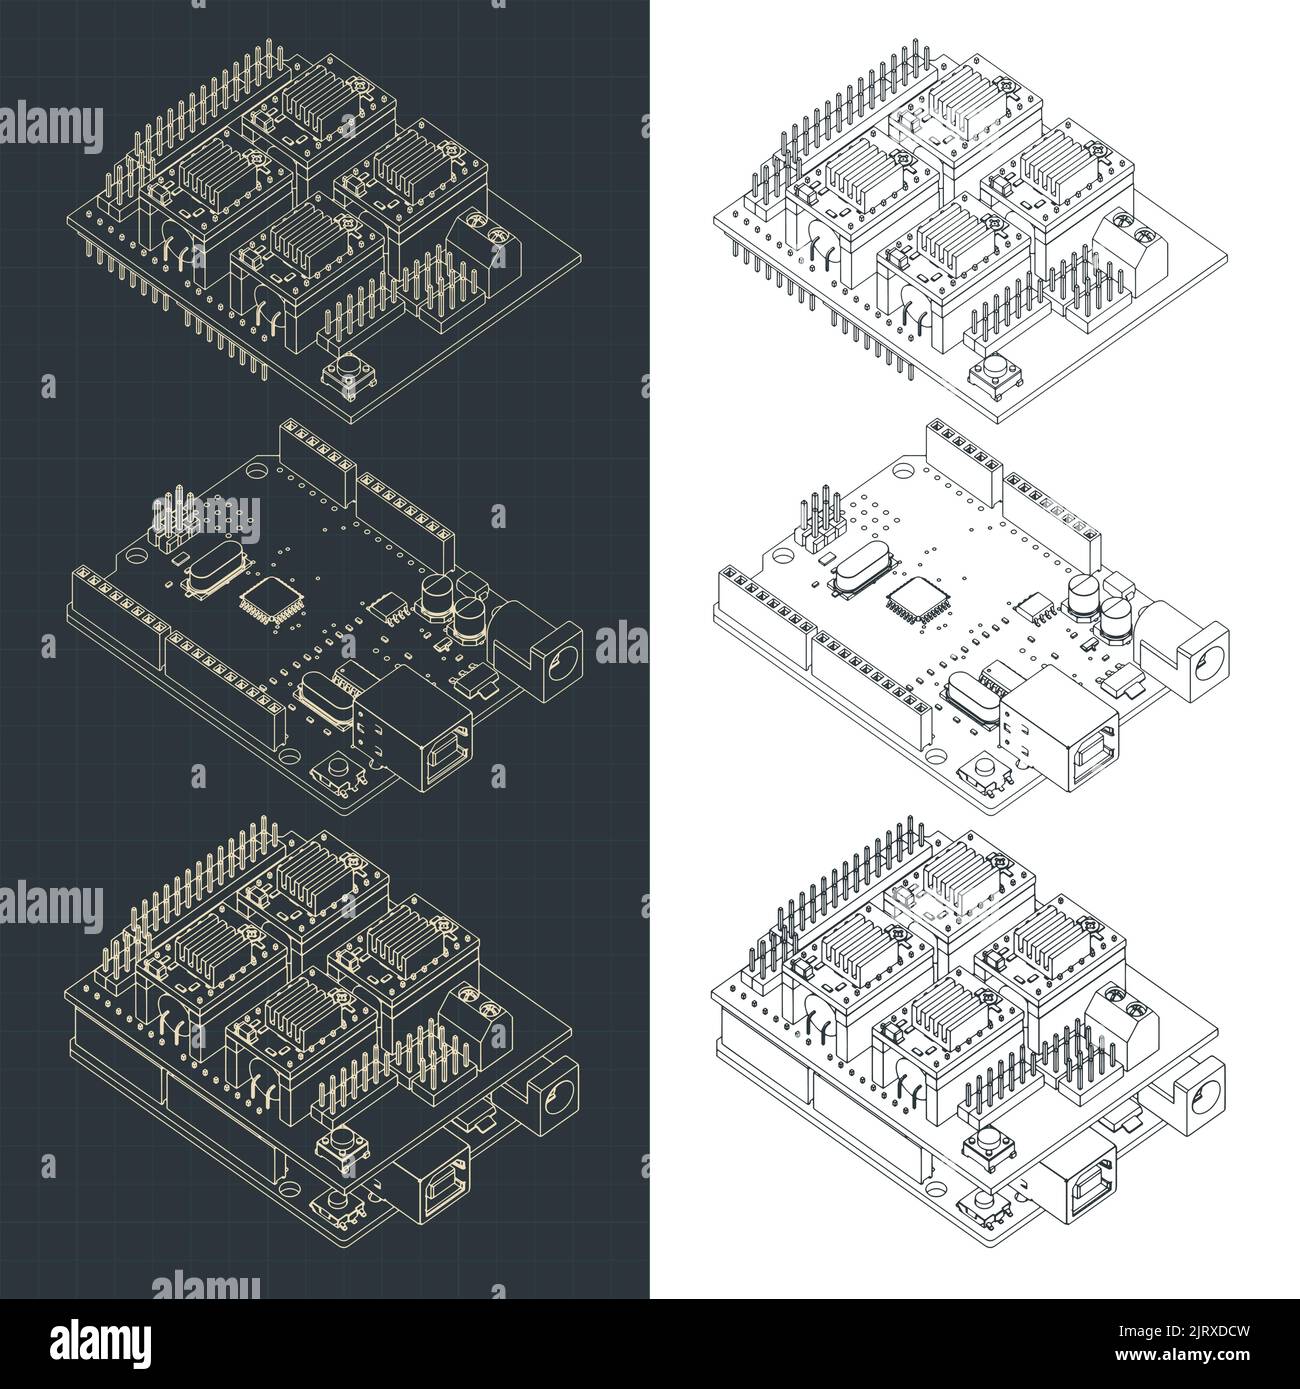 Stylized vector illustration of isometric blueprints of Arduino Uno and CNC shield Stock Vector